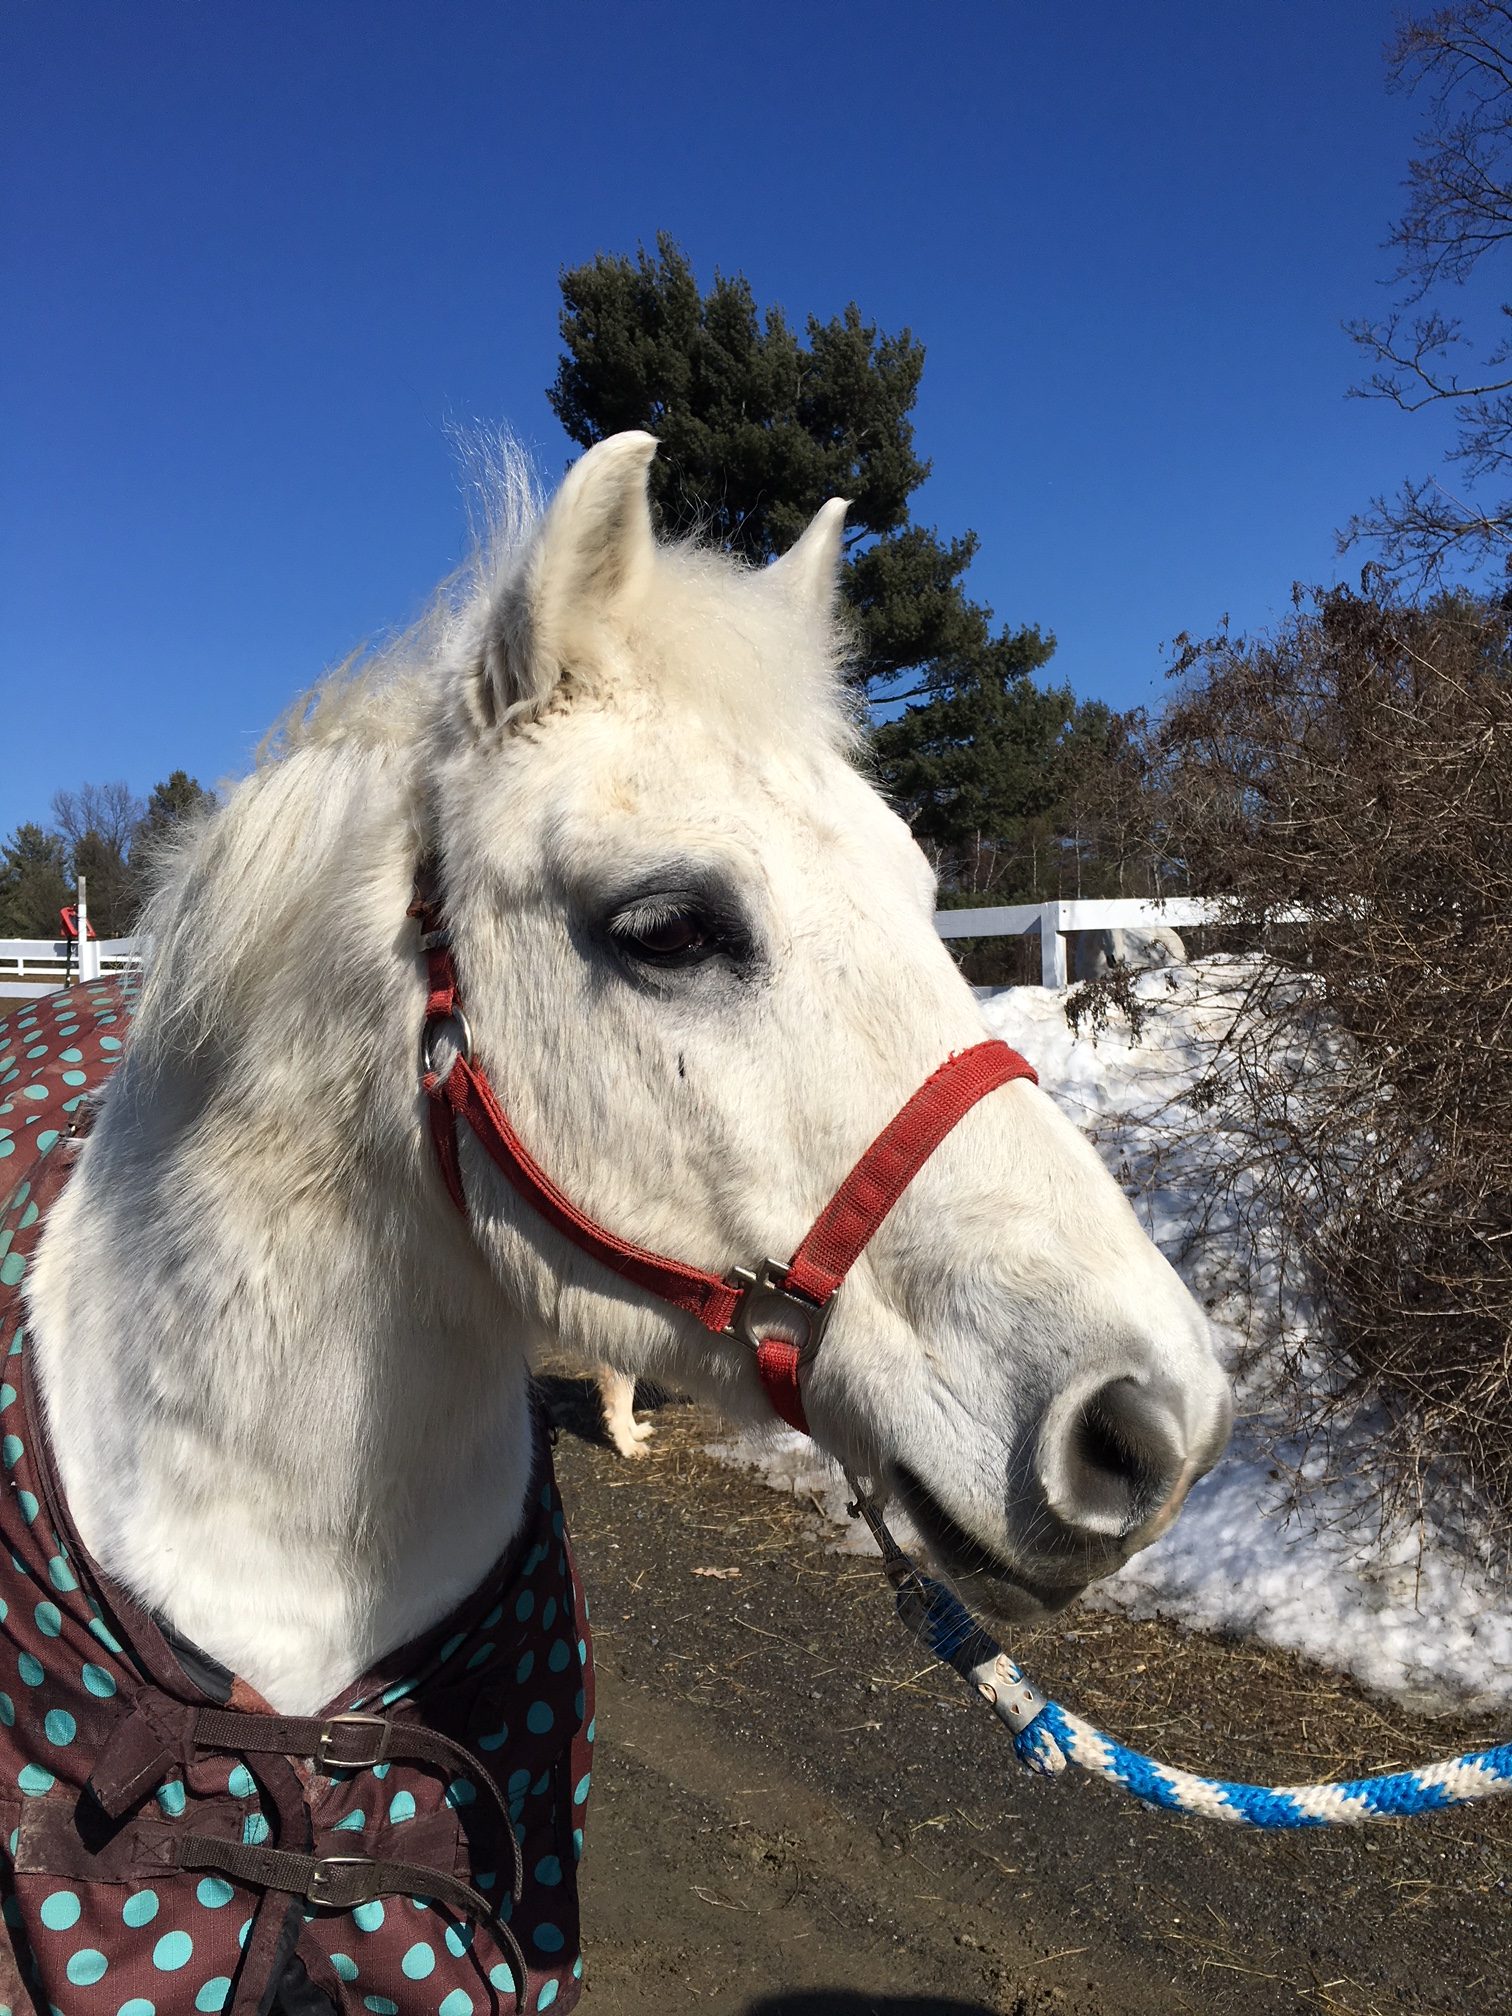 A close up of a white pony wearing a brown blanket facing to the right with a blue sky background